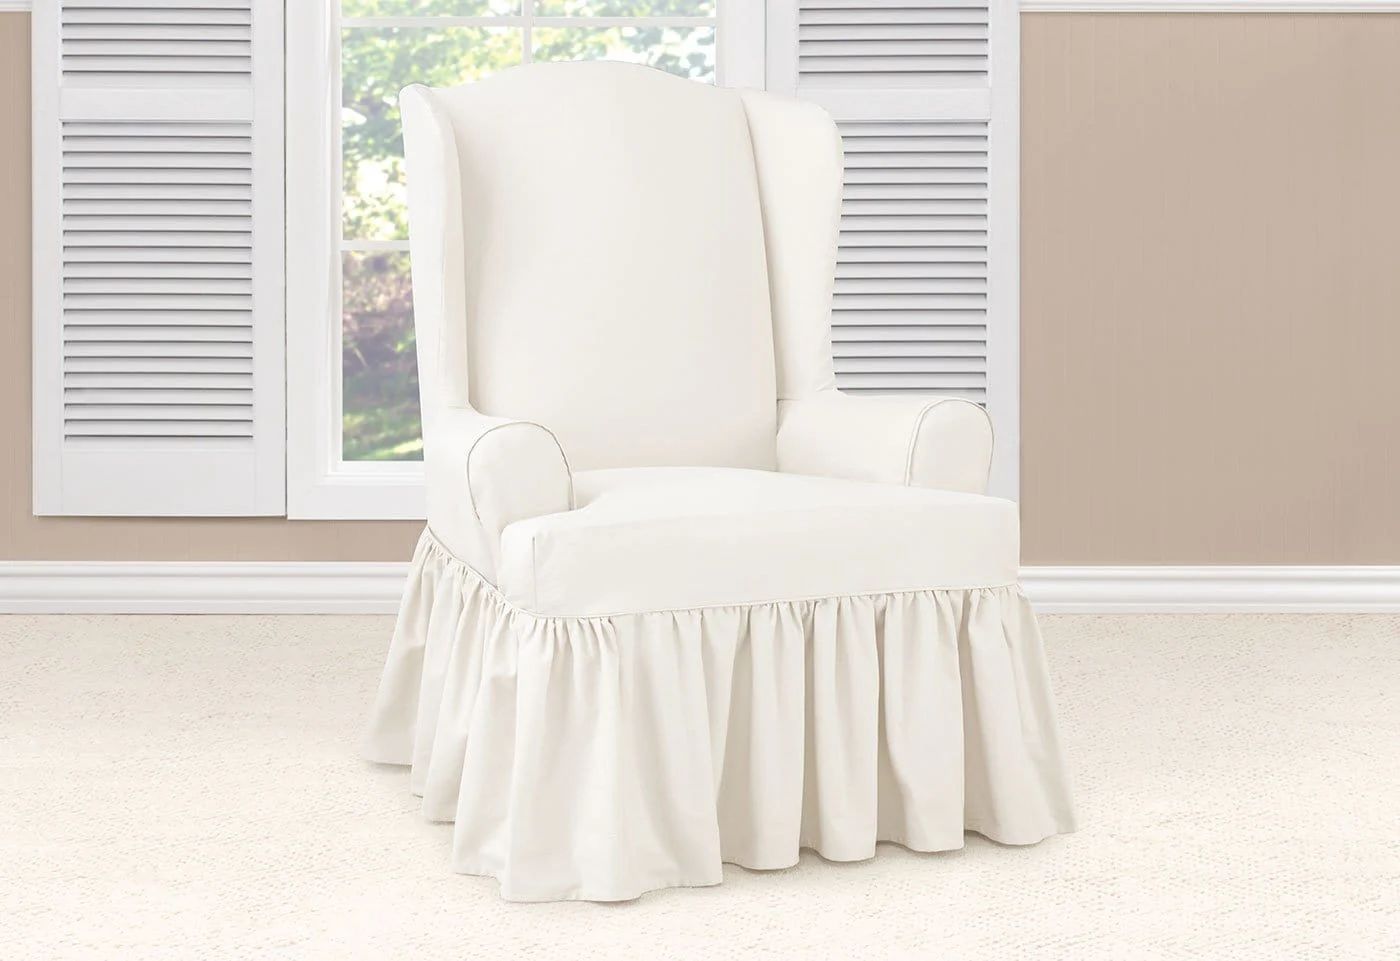 Essential Twill Ruffled Wing Chair Slipcover with Scotchgard | 100% Cotton | Machine Washable | Sure Fit Inc.